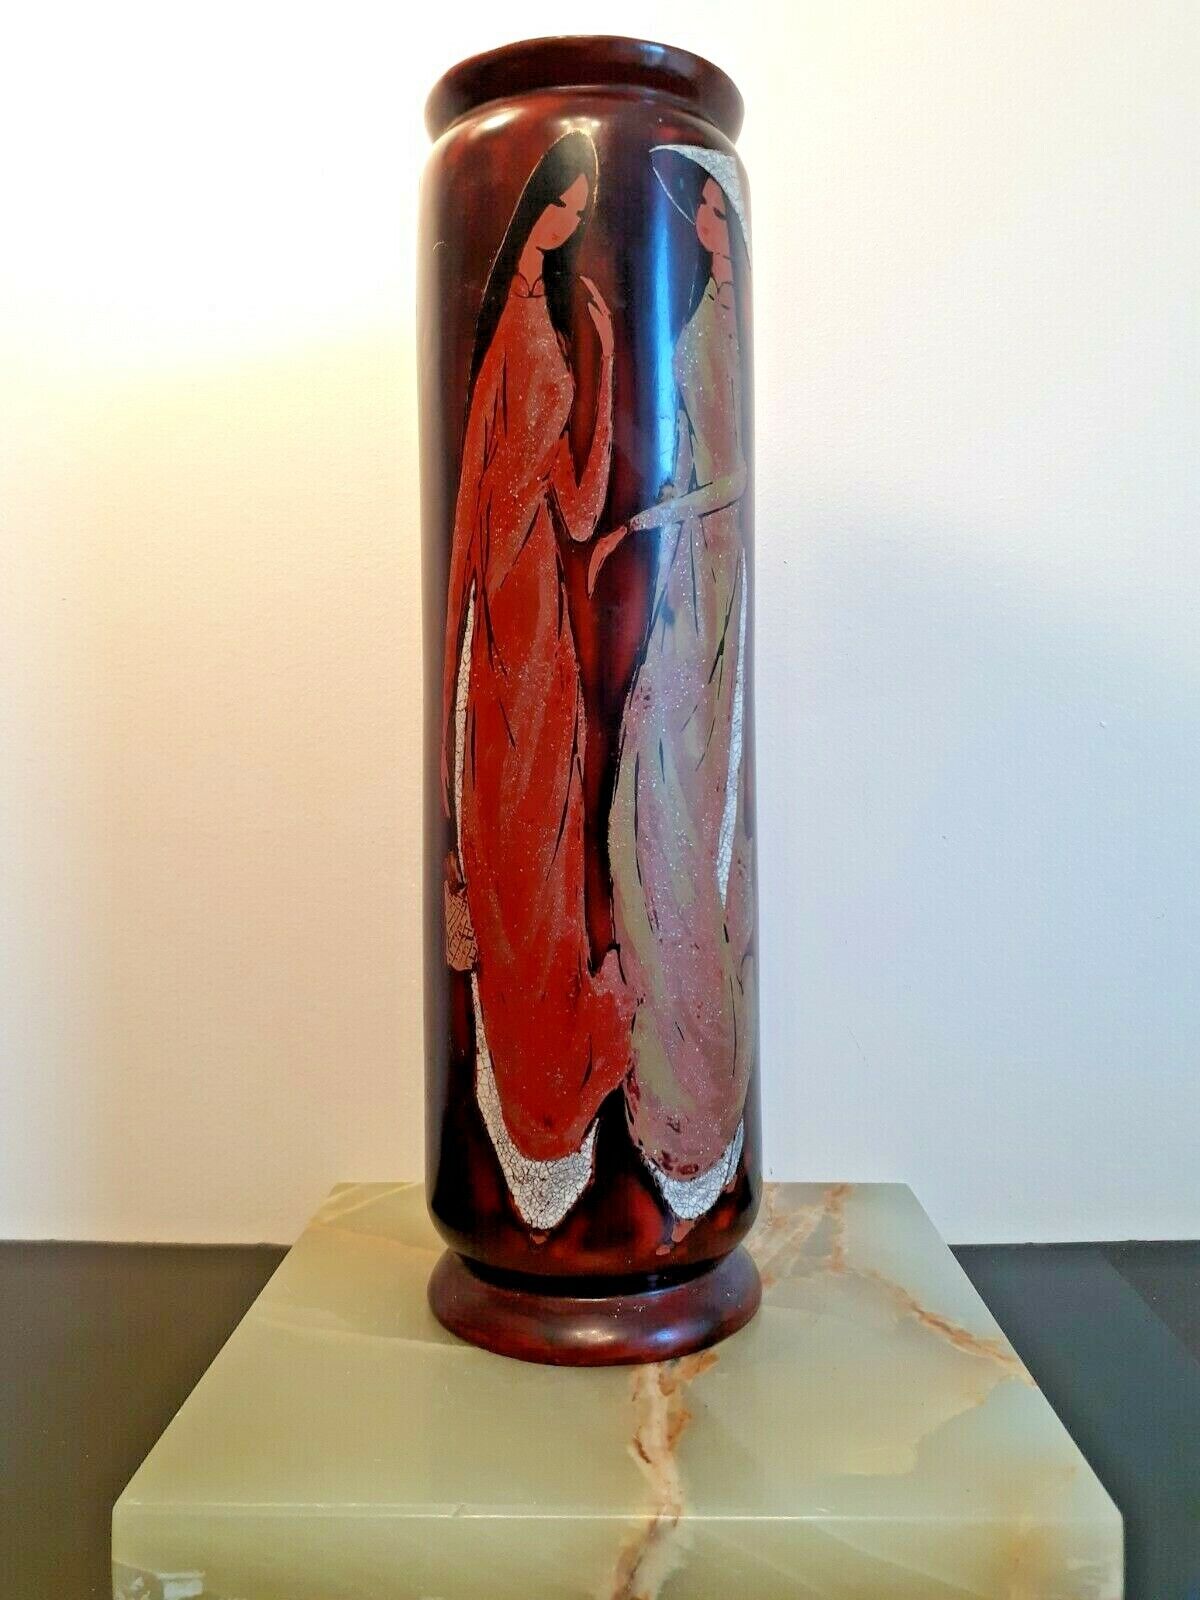 Vintage Vietnamese Decorated Lacquered Wood Vase Signed by Artist Ng. Hữu Sang